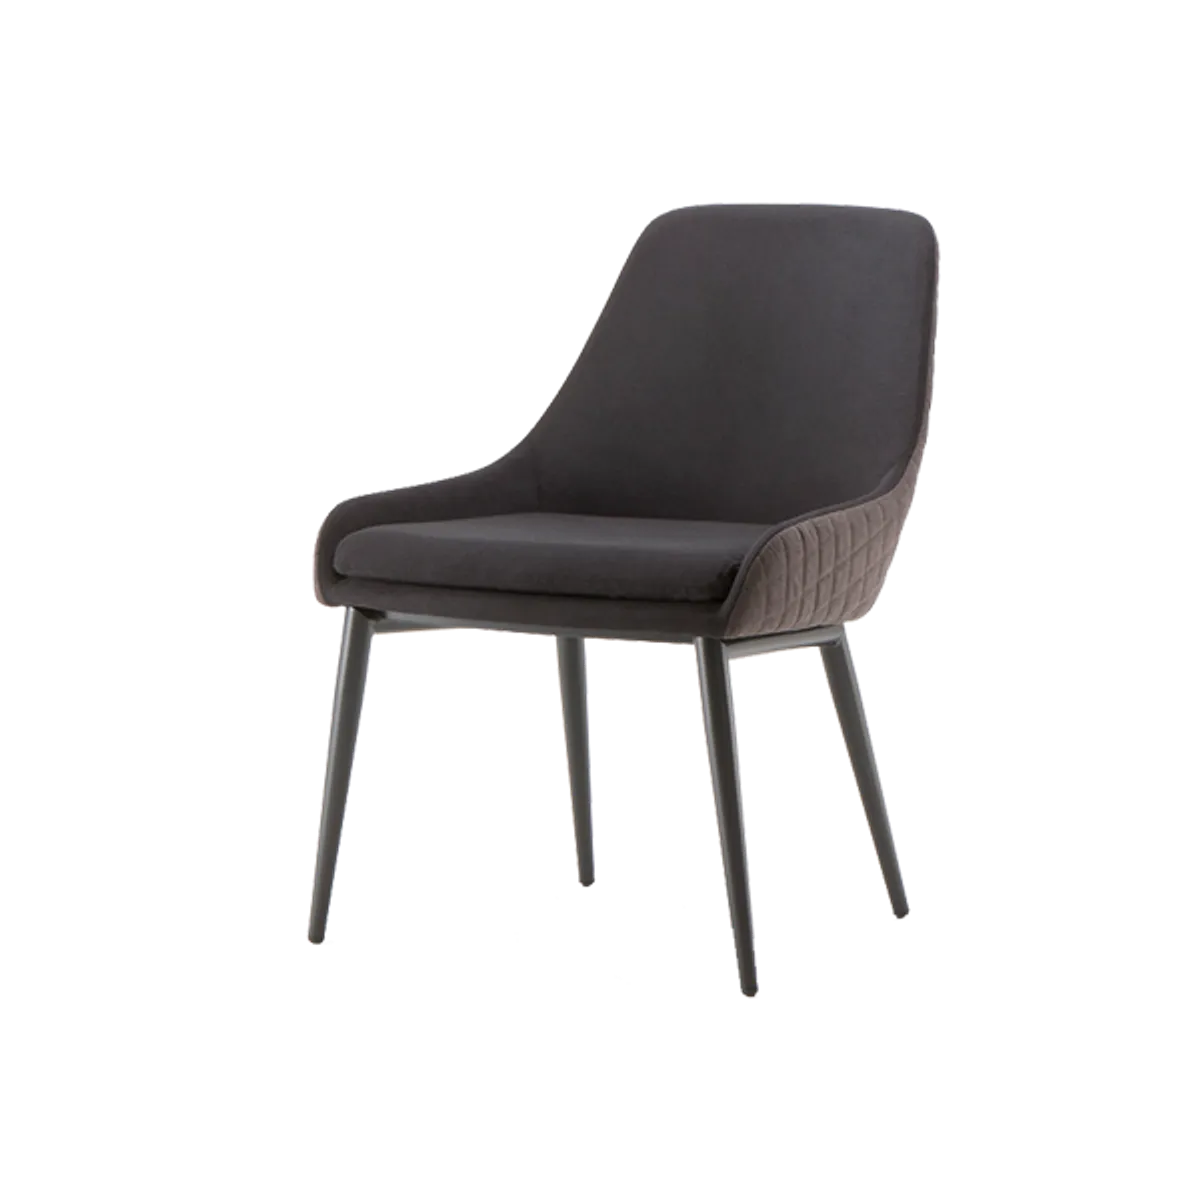 Web Josie 2 Lounge Chair Upholstered Furniture With Wooden Legs Insideoutcontracts